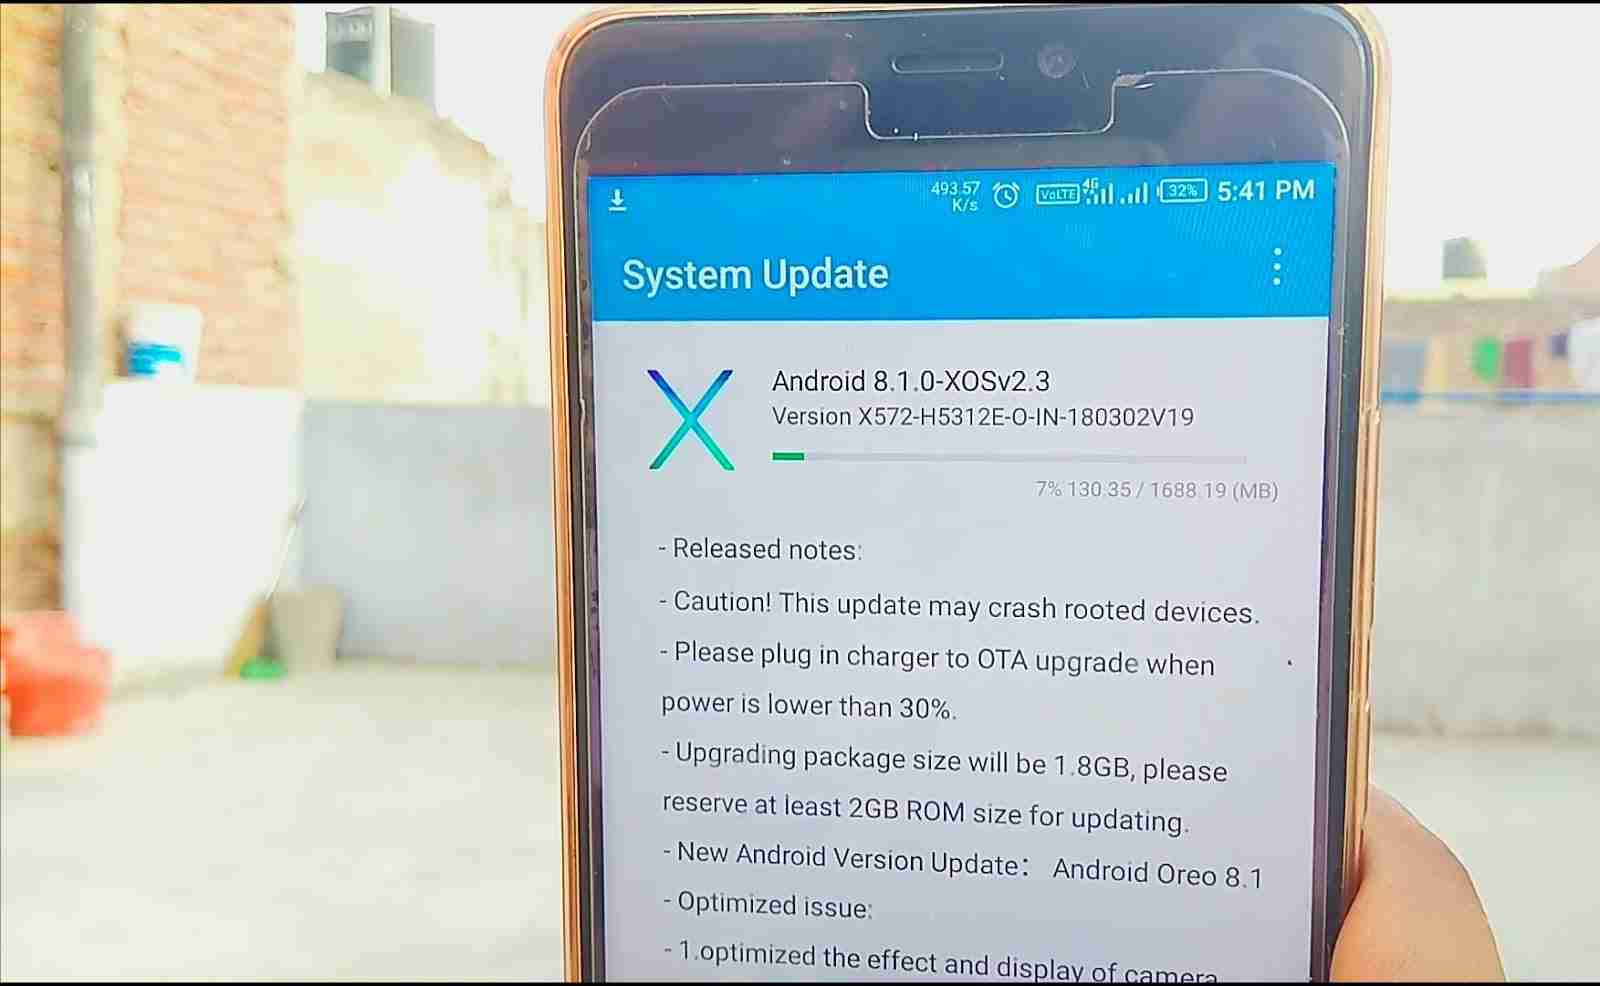 Downloading the update file for infinix note 4 android 8.1 oreo + xos 3.2 hummingbird update